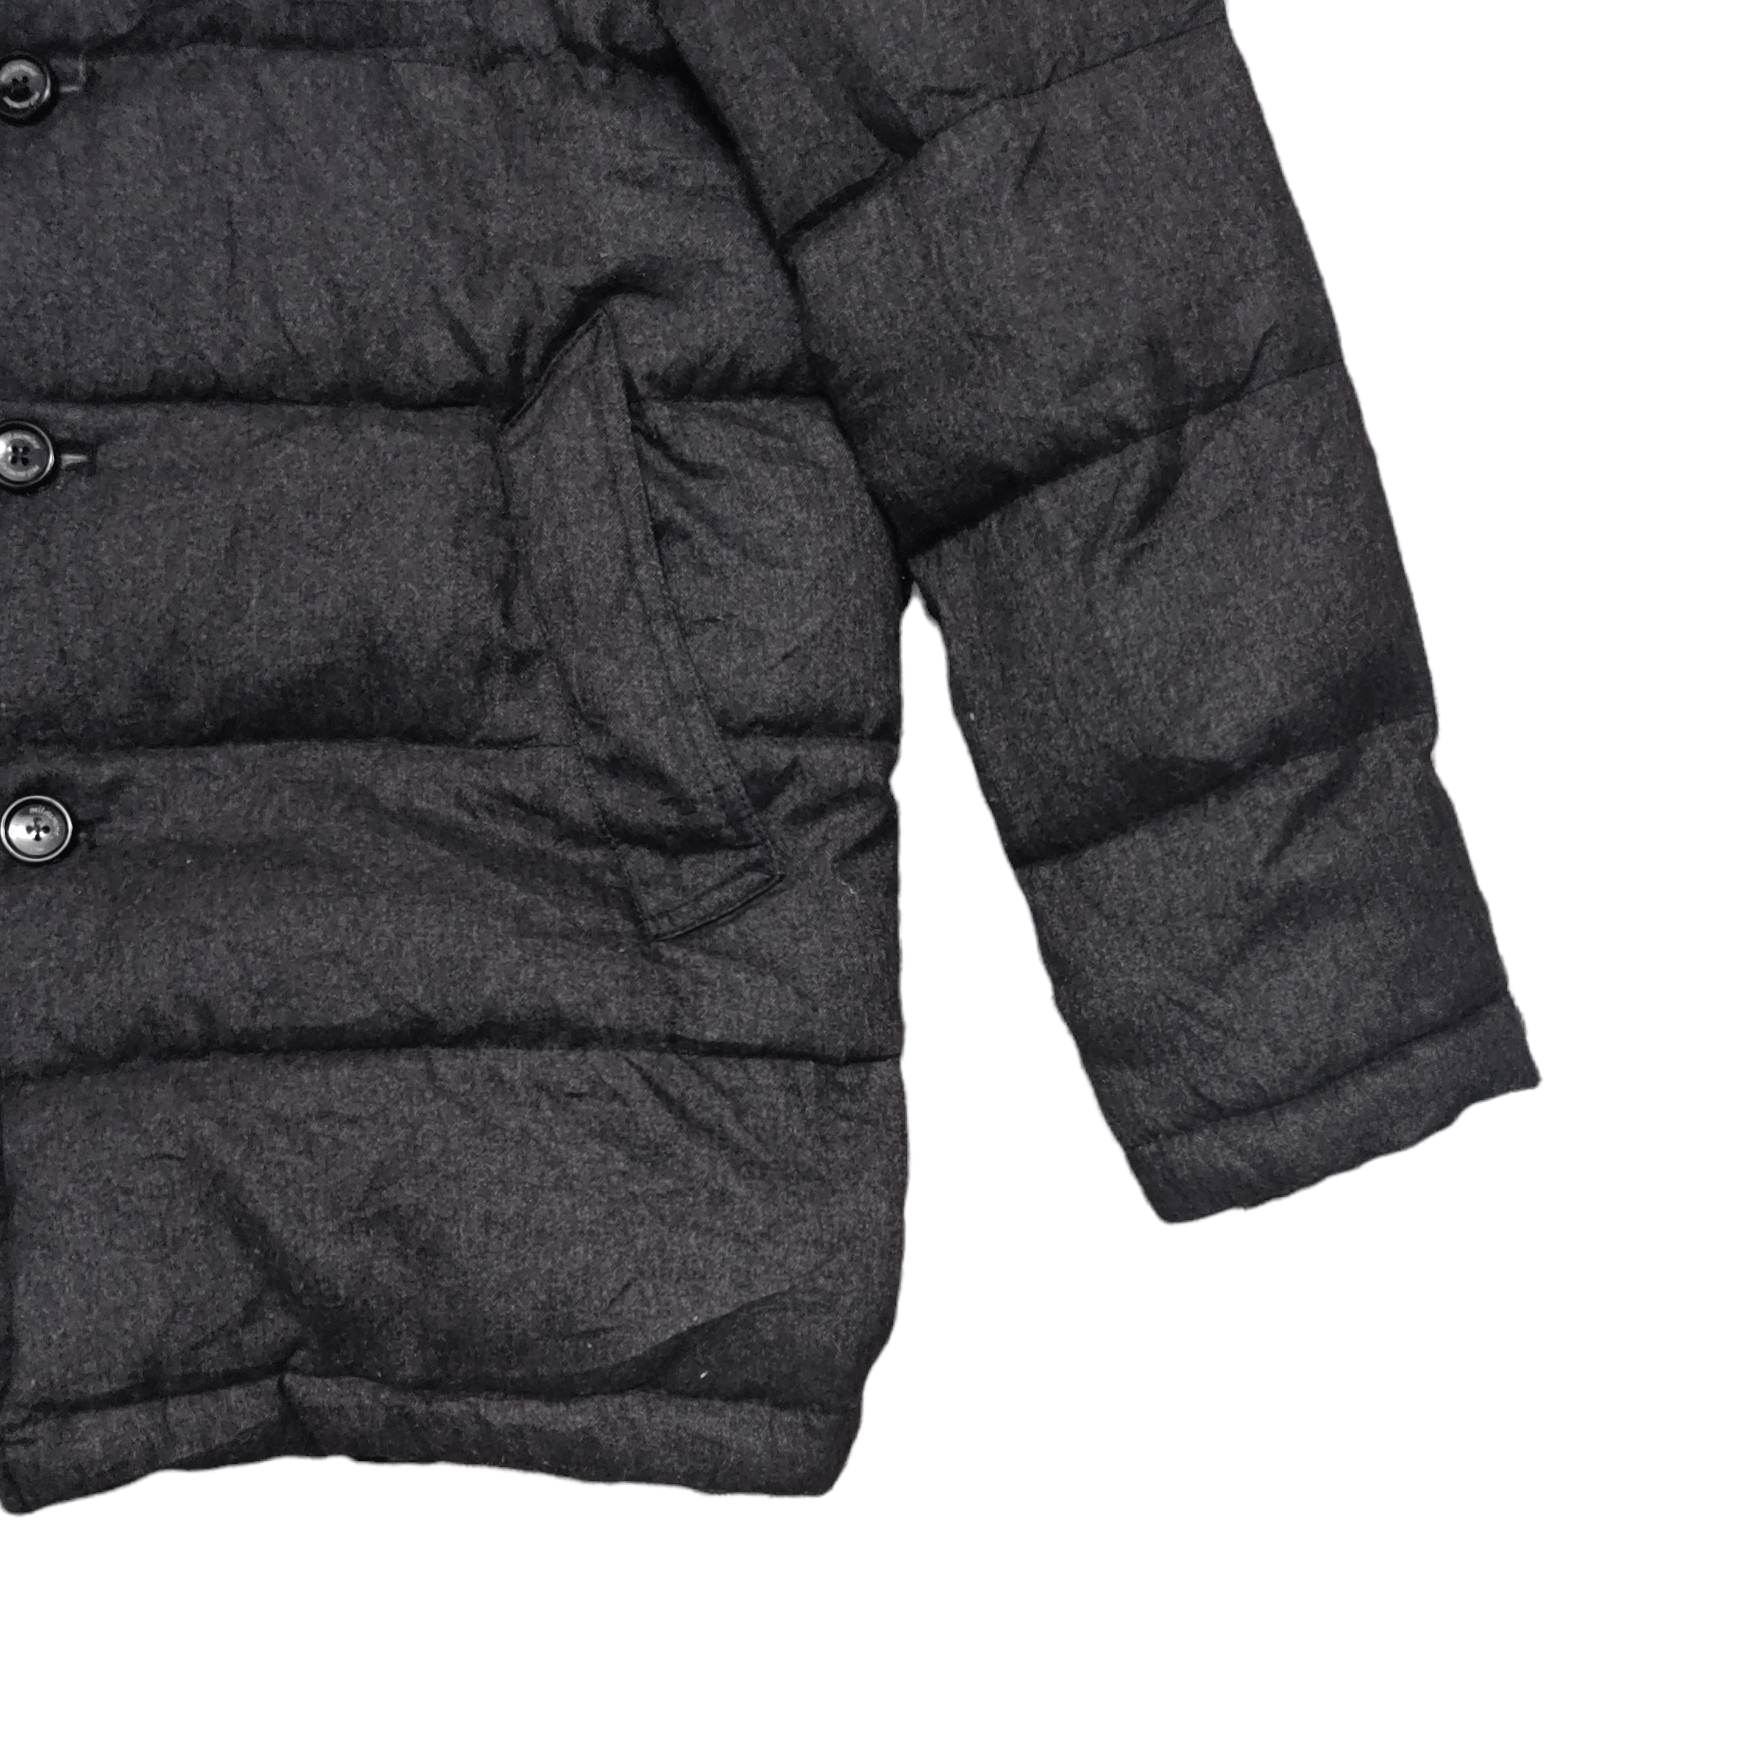 Archival Clothing - Mitsumine Puffer Down Jacket - 4